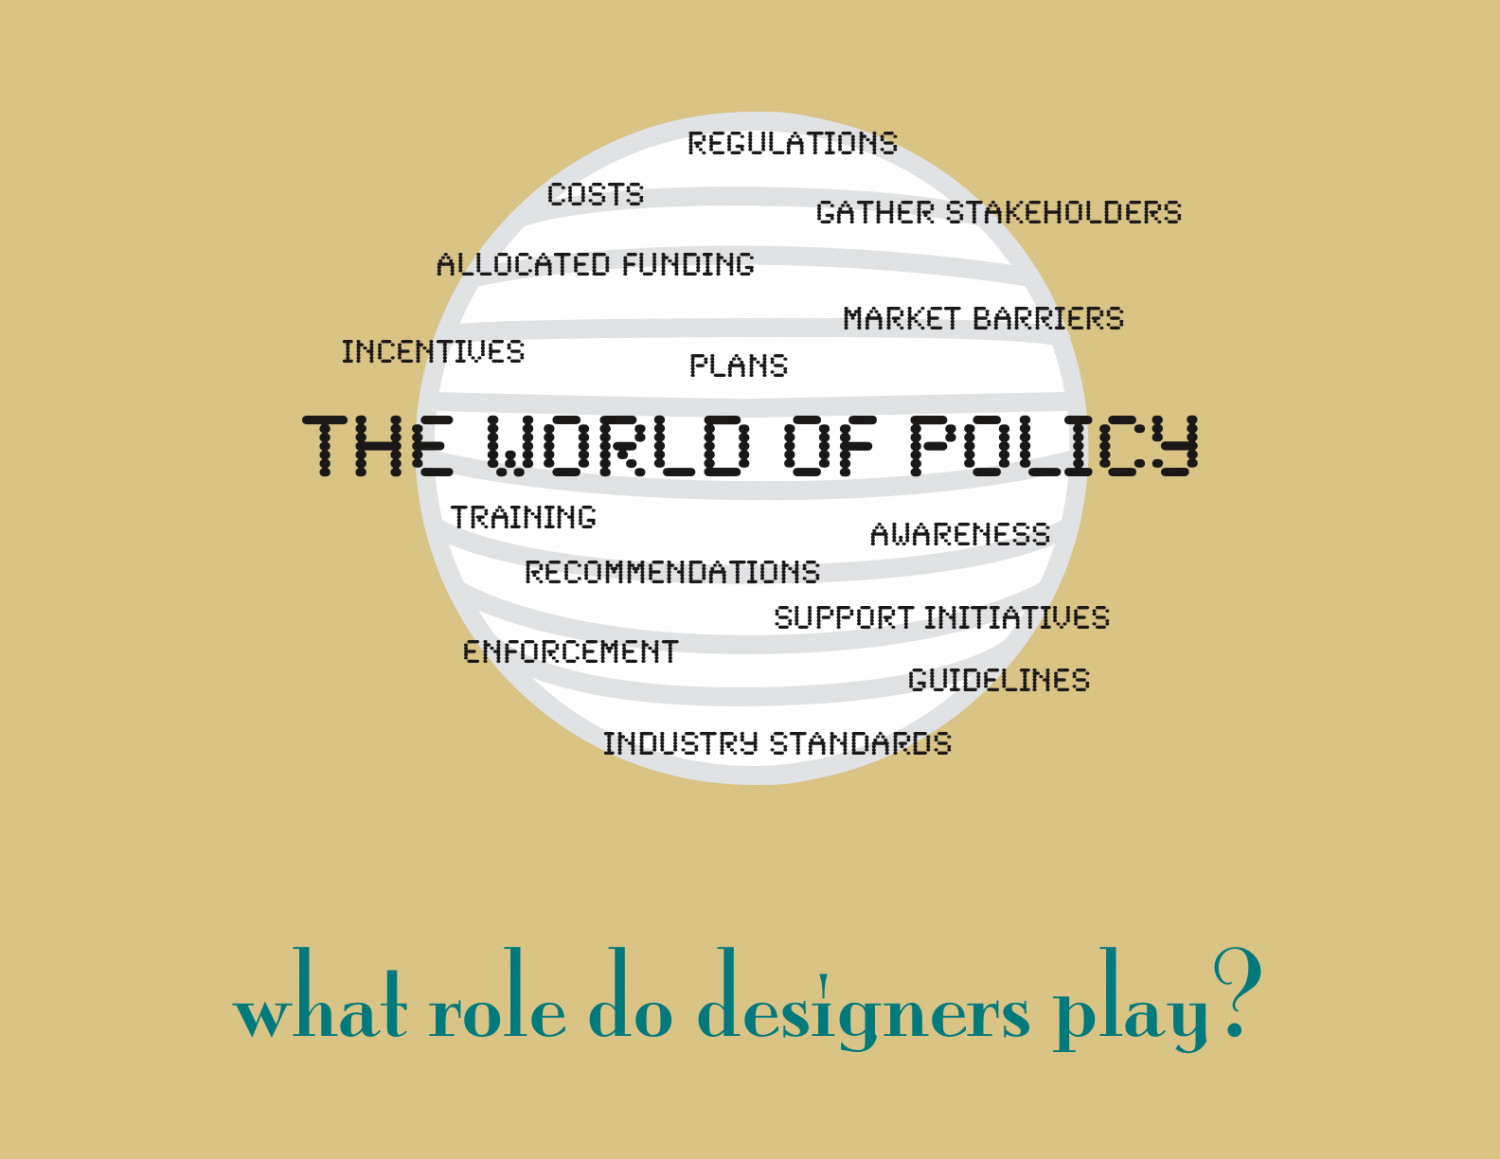 Designers in the World of Policy Infographic